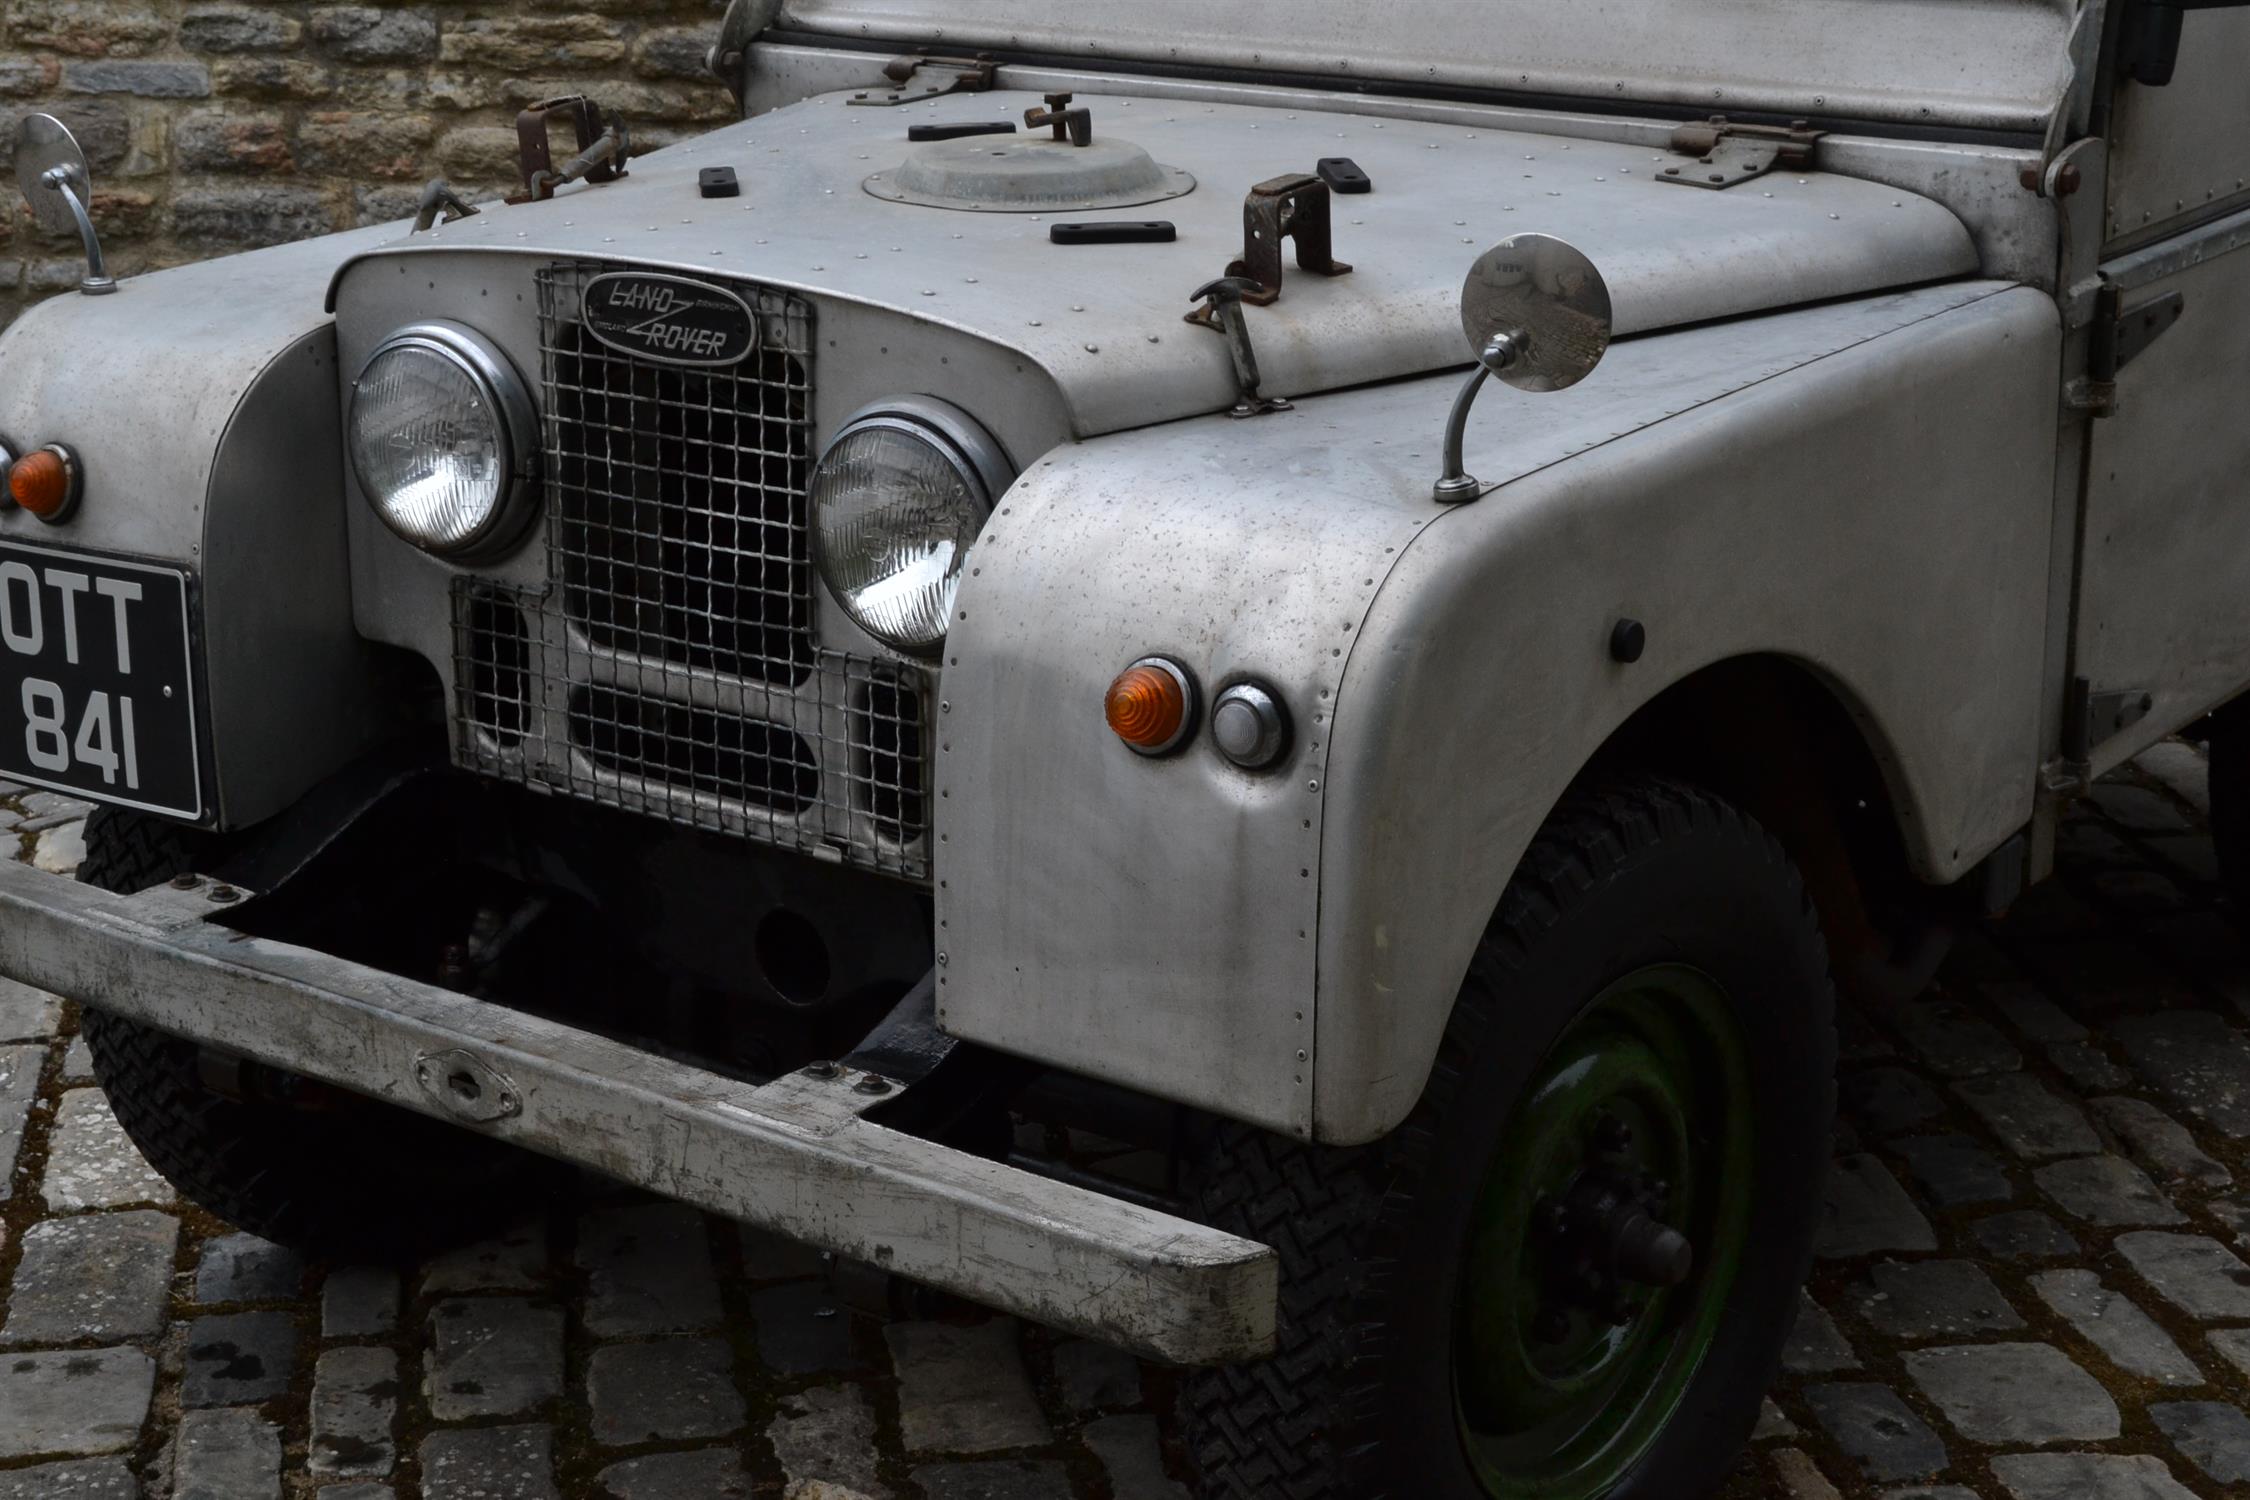 1953 Land Rover 80" Series I Pick-Up - Image 10 of 10